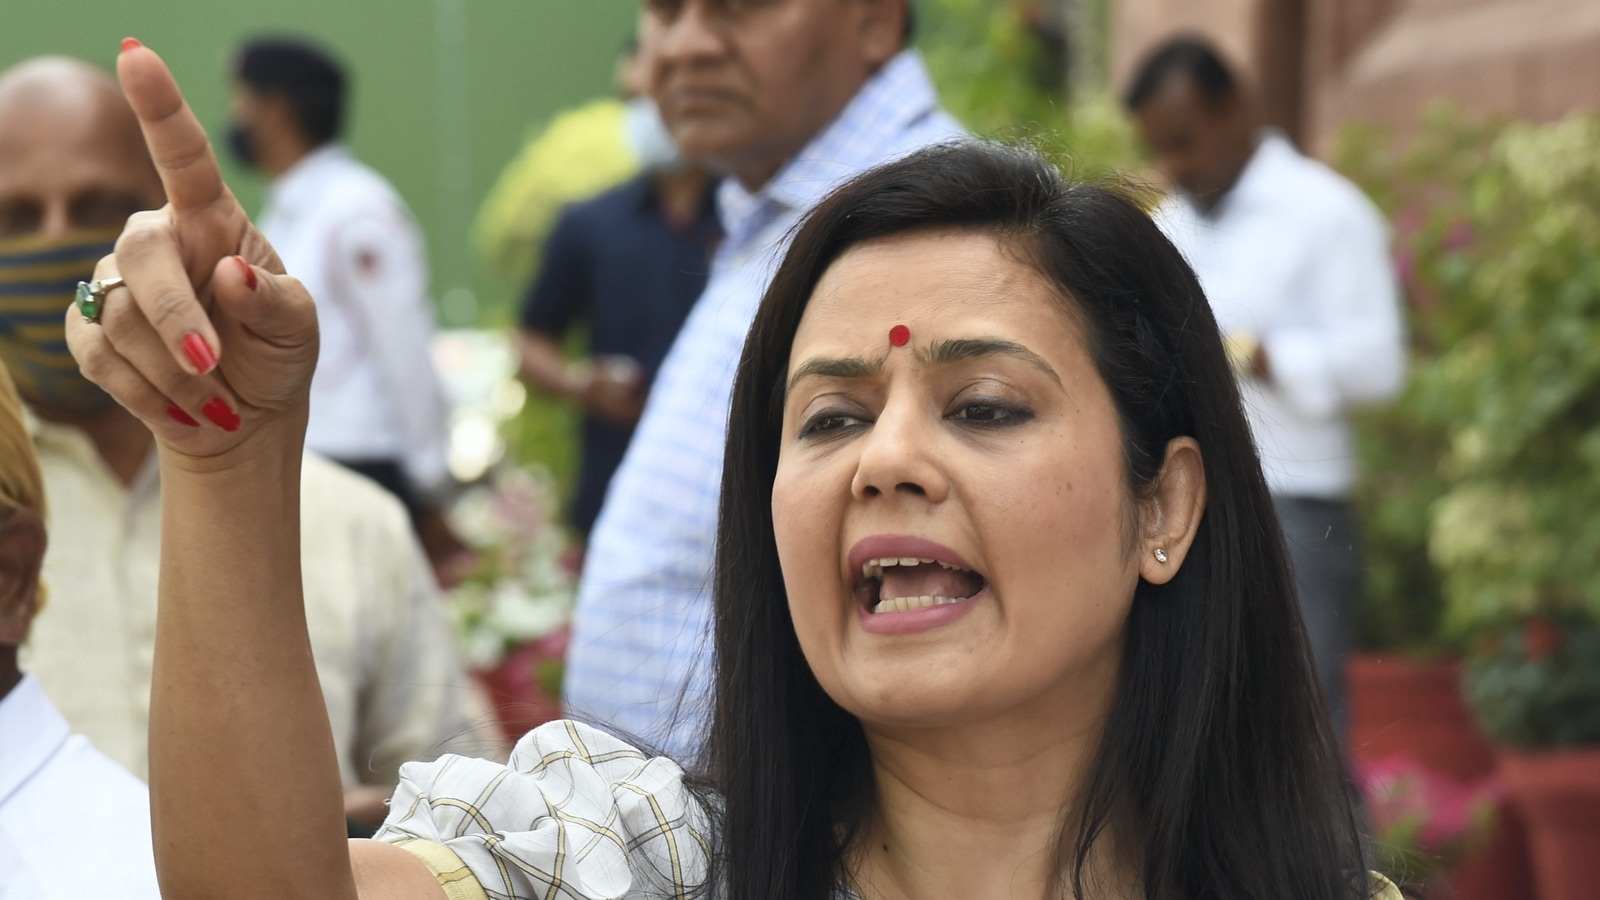 TMC has prevented consolidation of Hindu votes through MGP tie-up: Mahua  Moitra